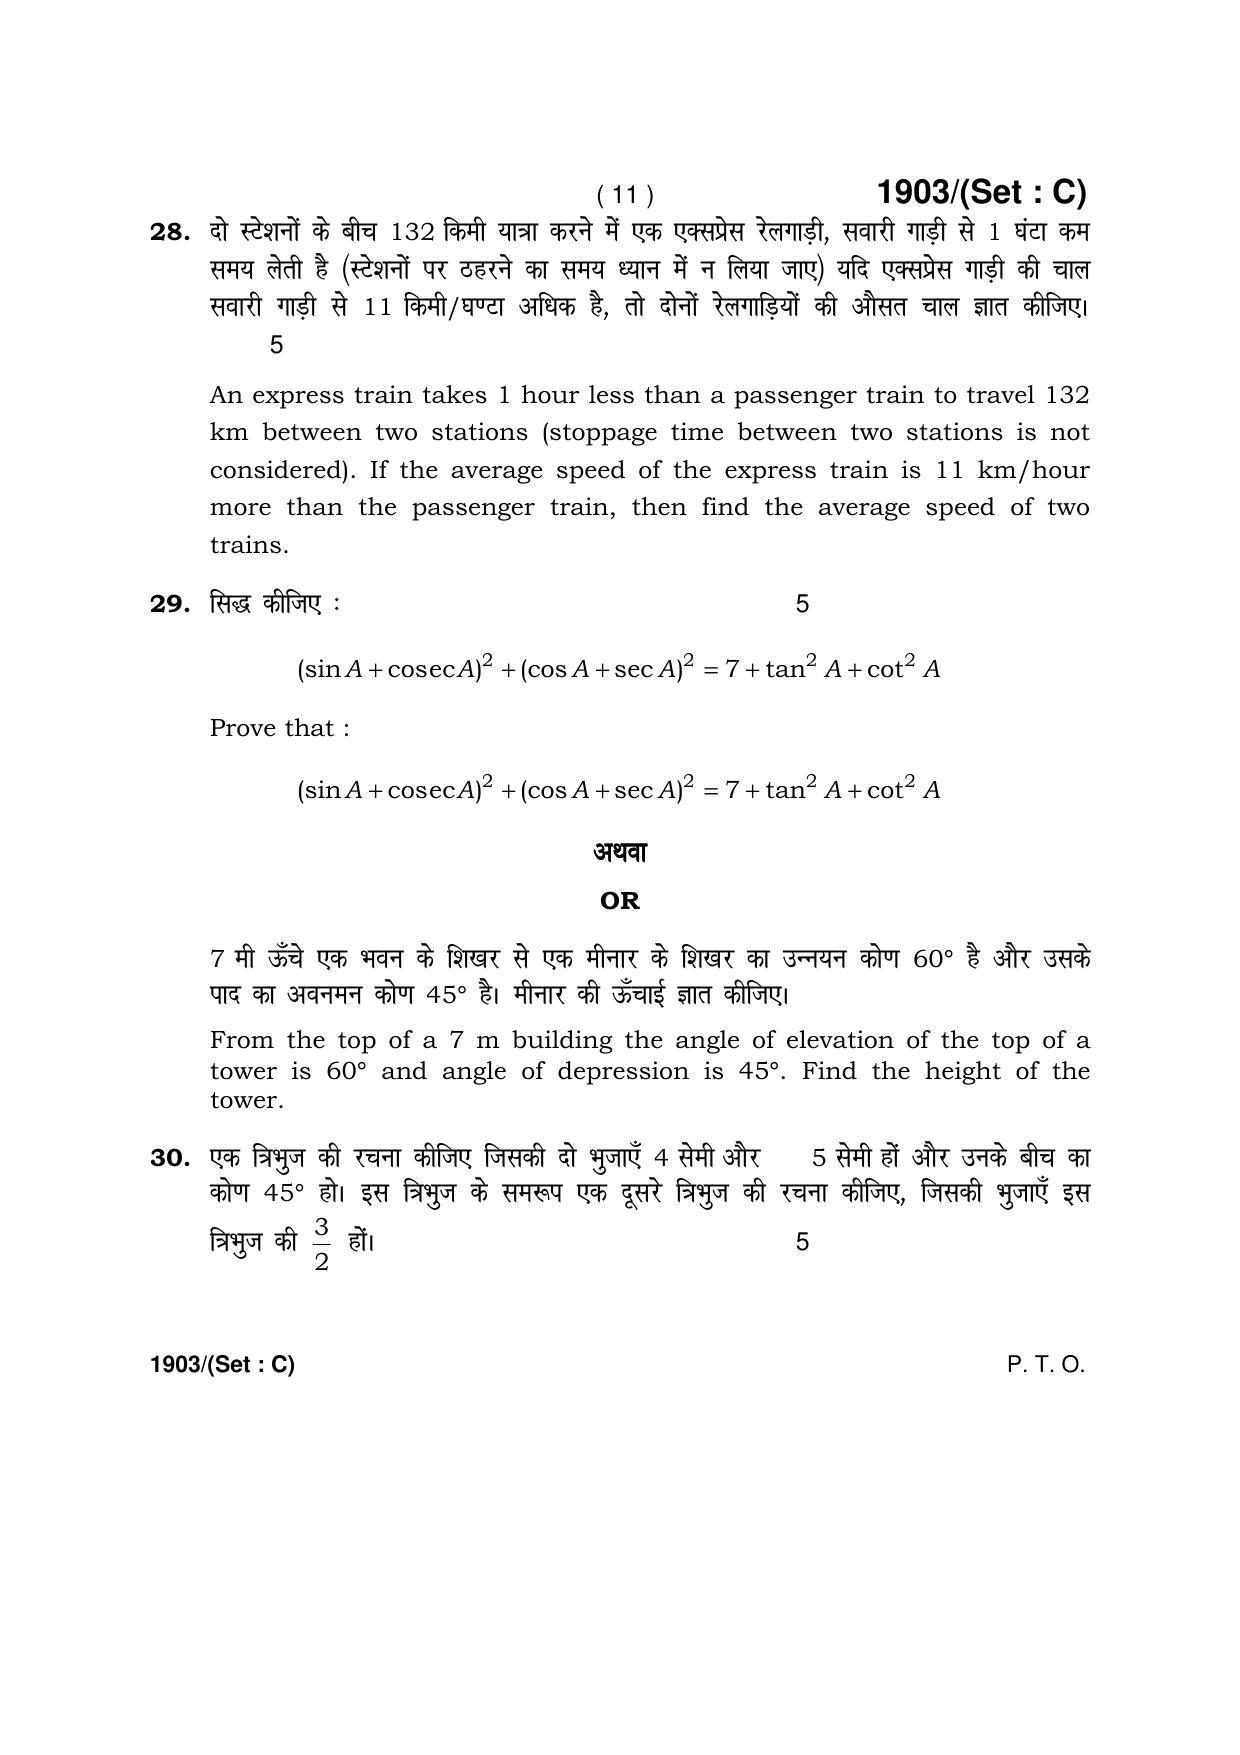 Haryana Board HBSE Class 10 Mathematics -C 2017 Question Paper - Page 11